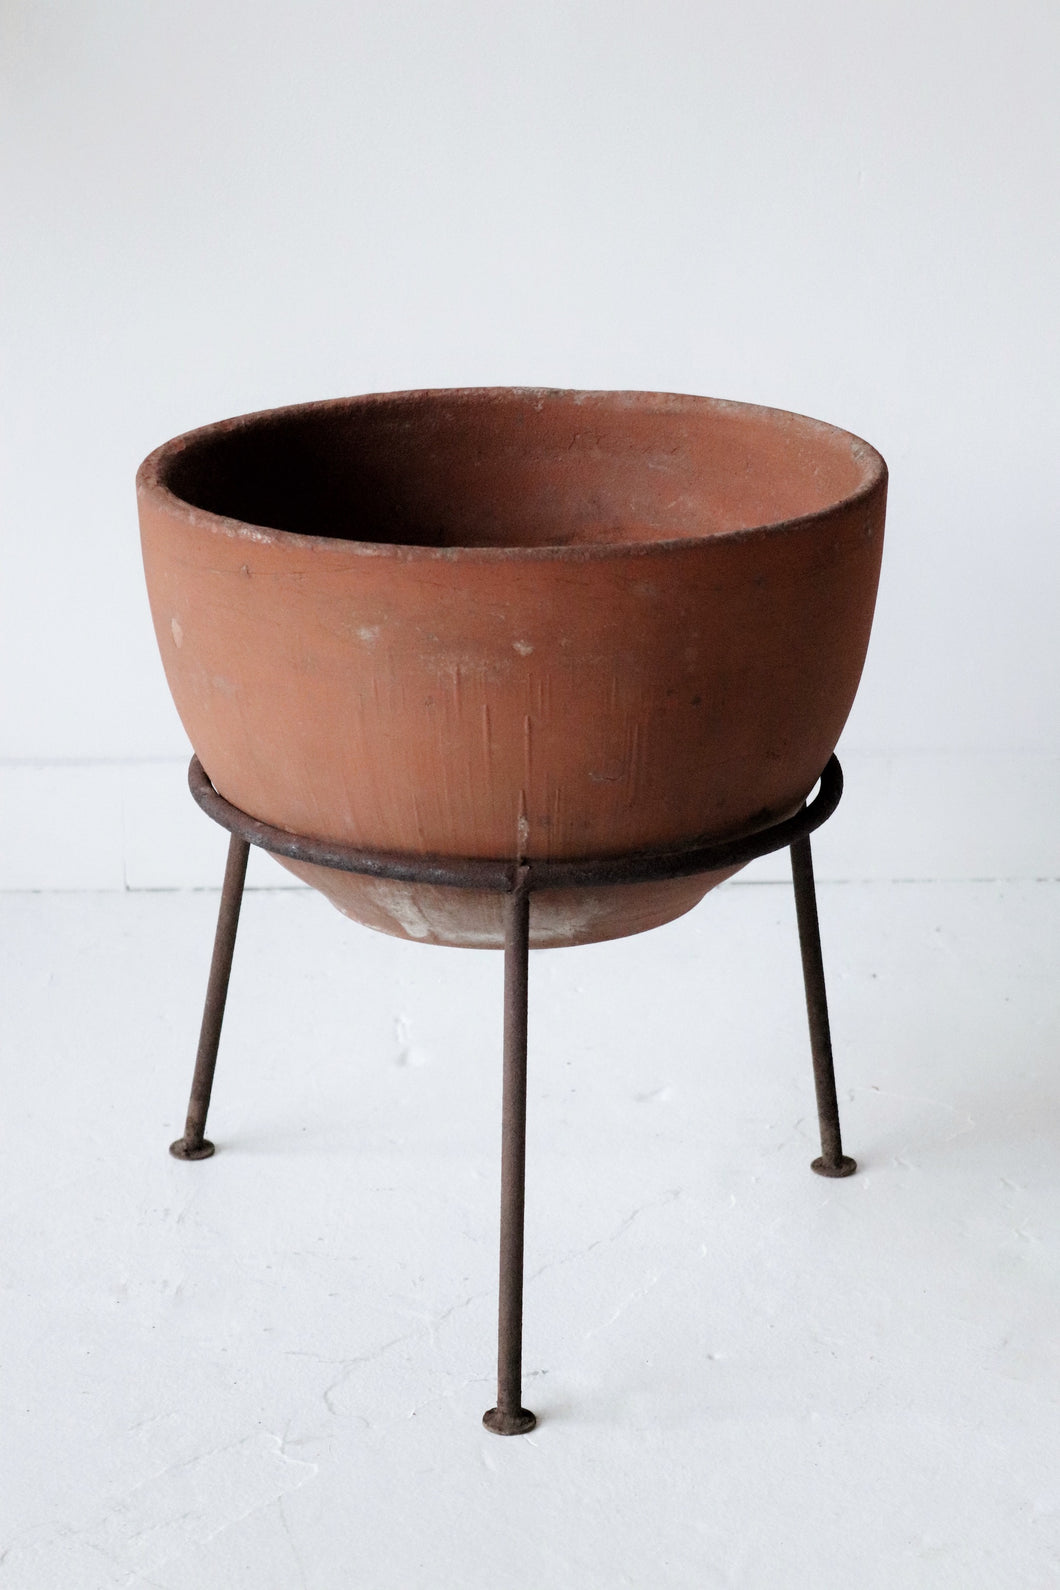 Architectural Pottery Planter & Stand